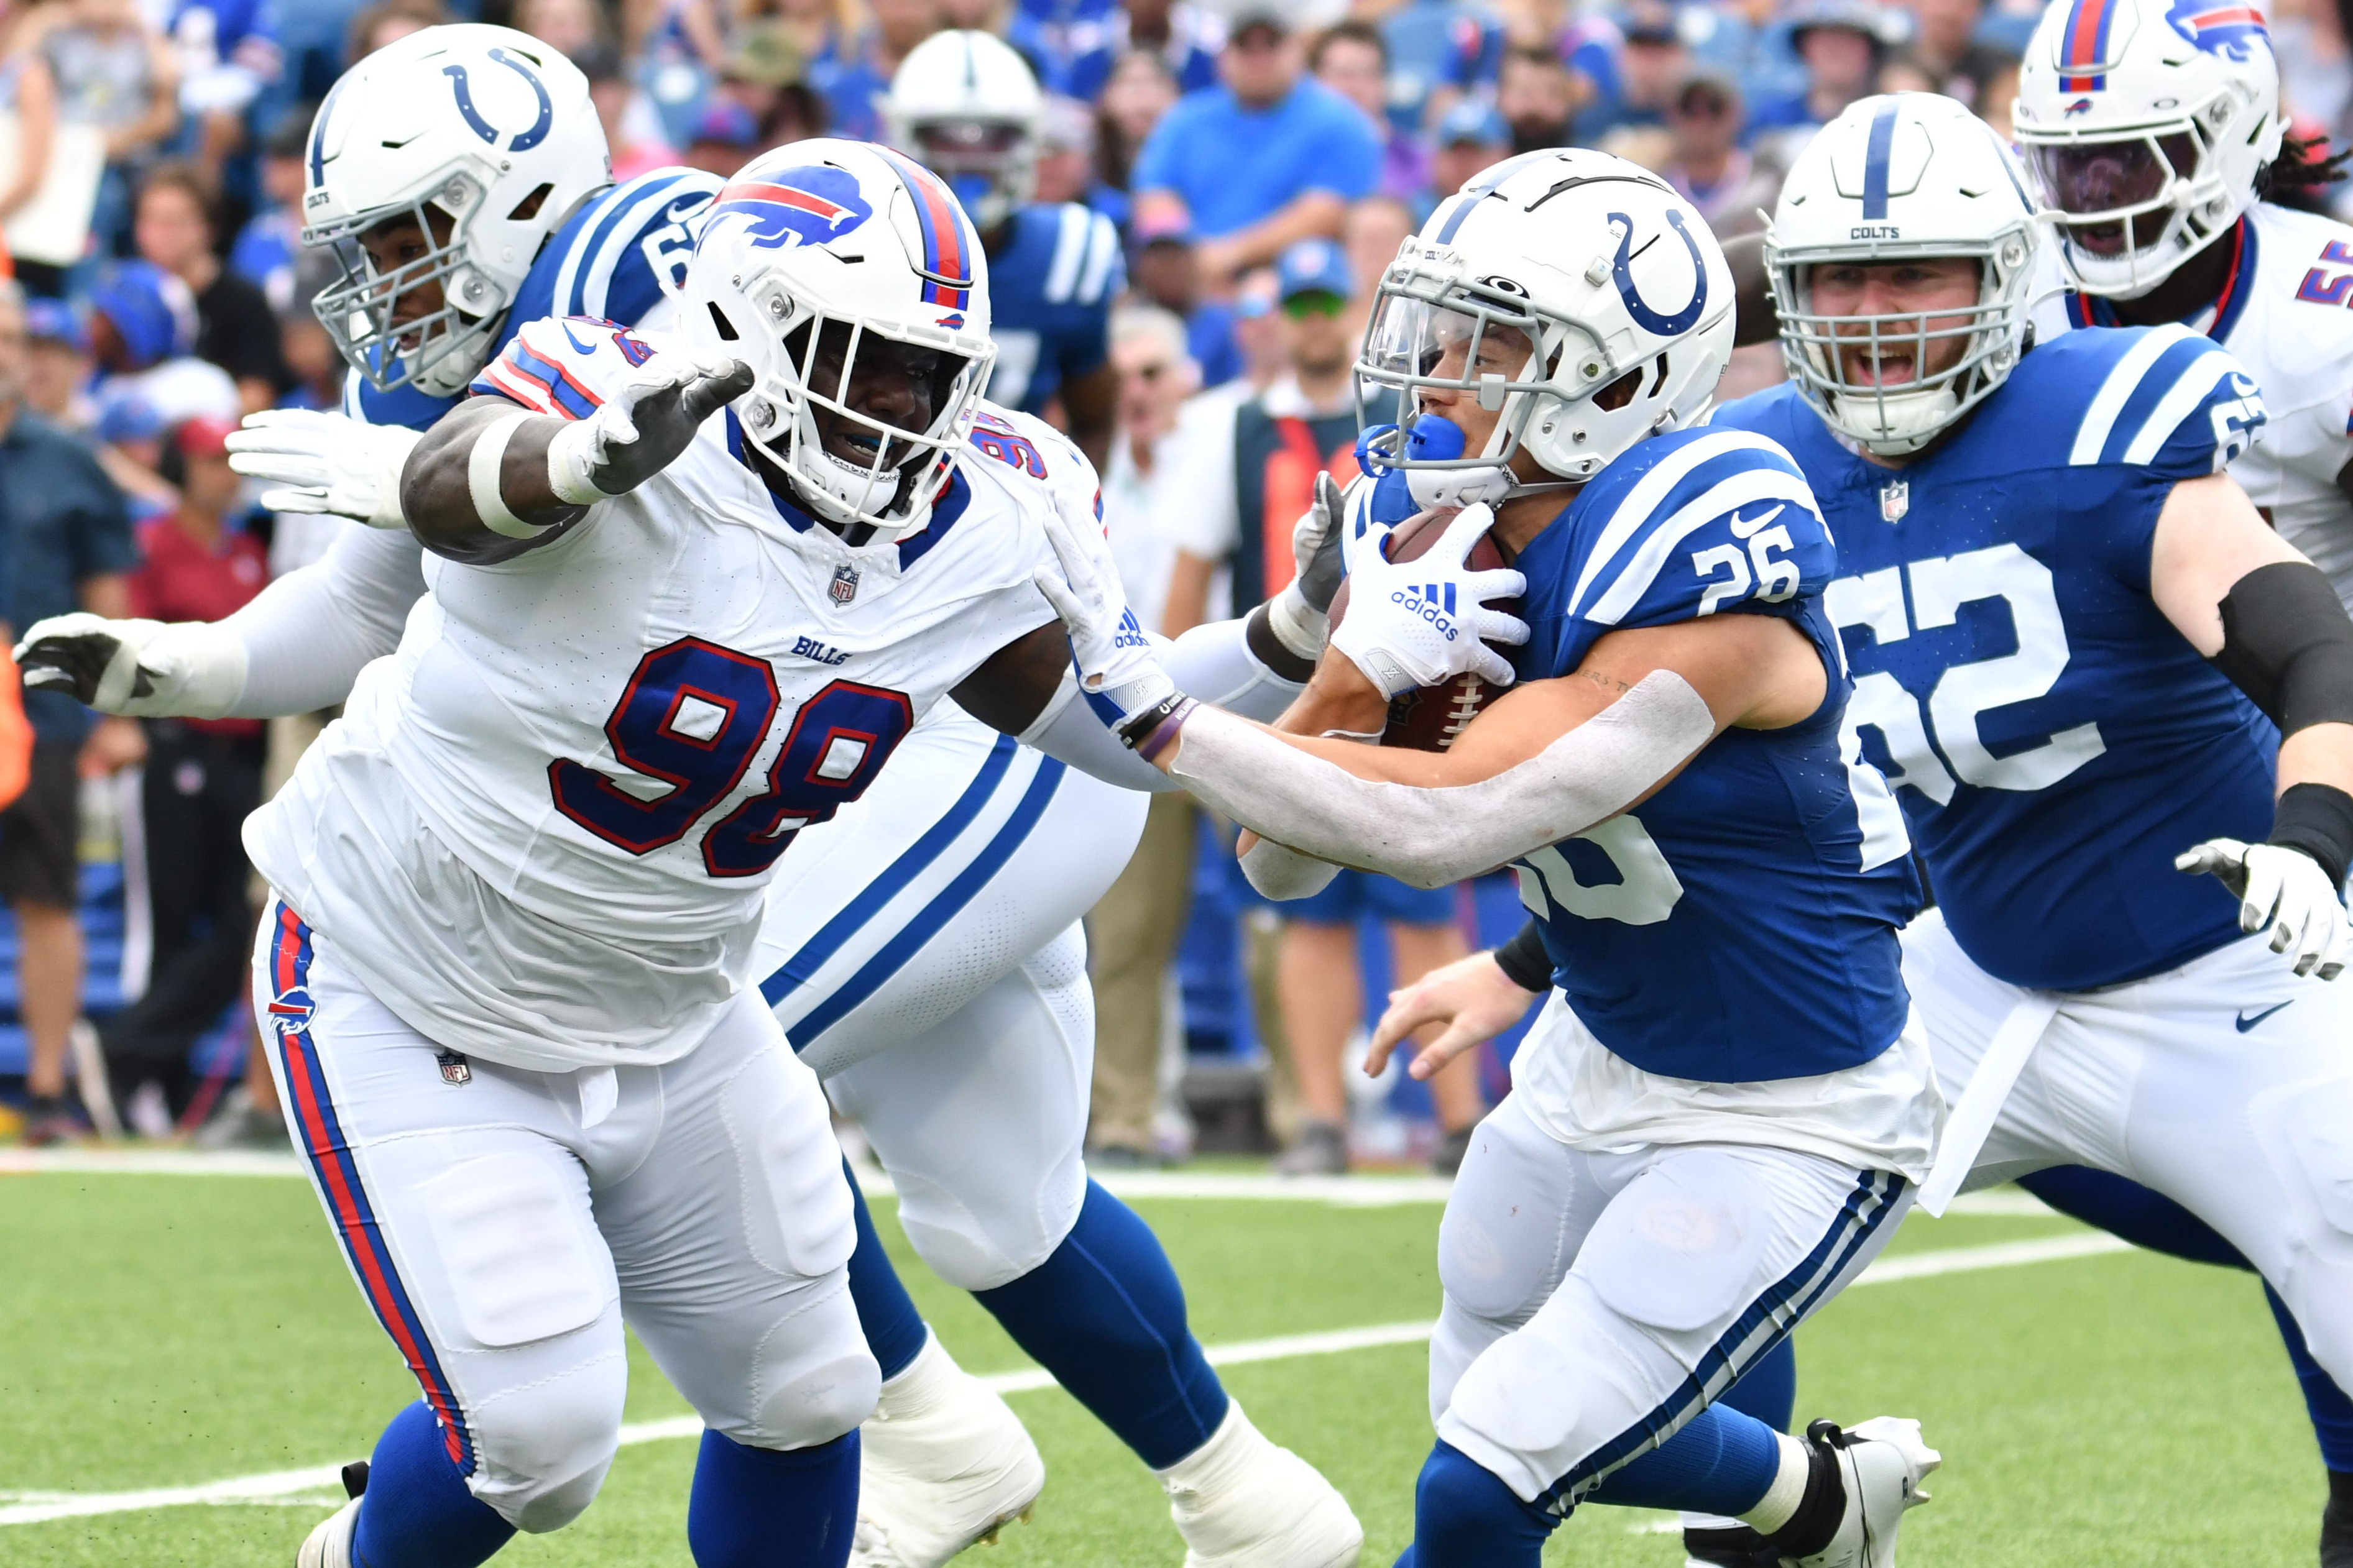 Indianapolis Colts running back Evan Hull (26) runs the ball against Buffalo Bills defensive tackle Poona Ford (98) in the second quarter of a preseason game at Highmark Stadium.